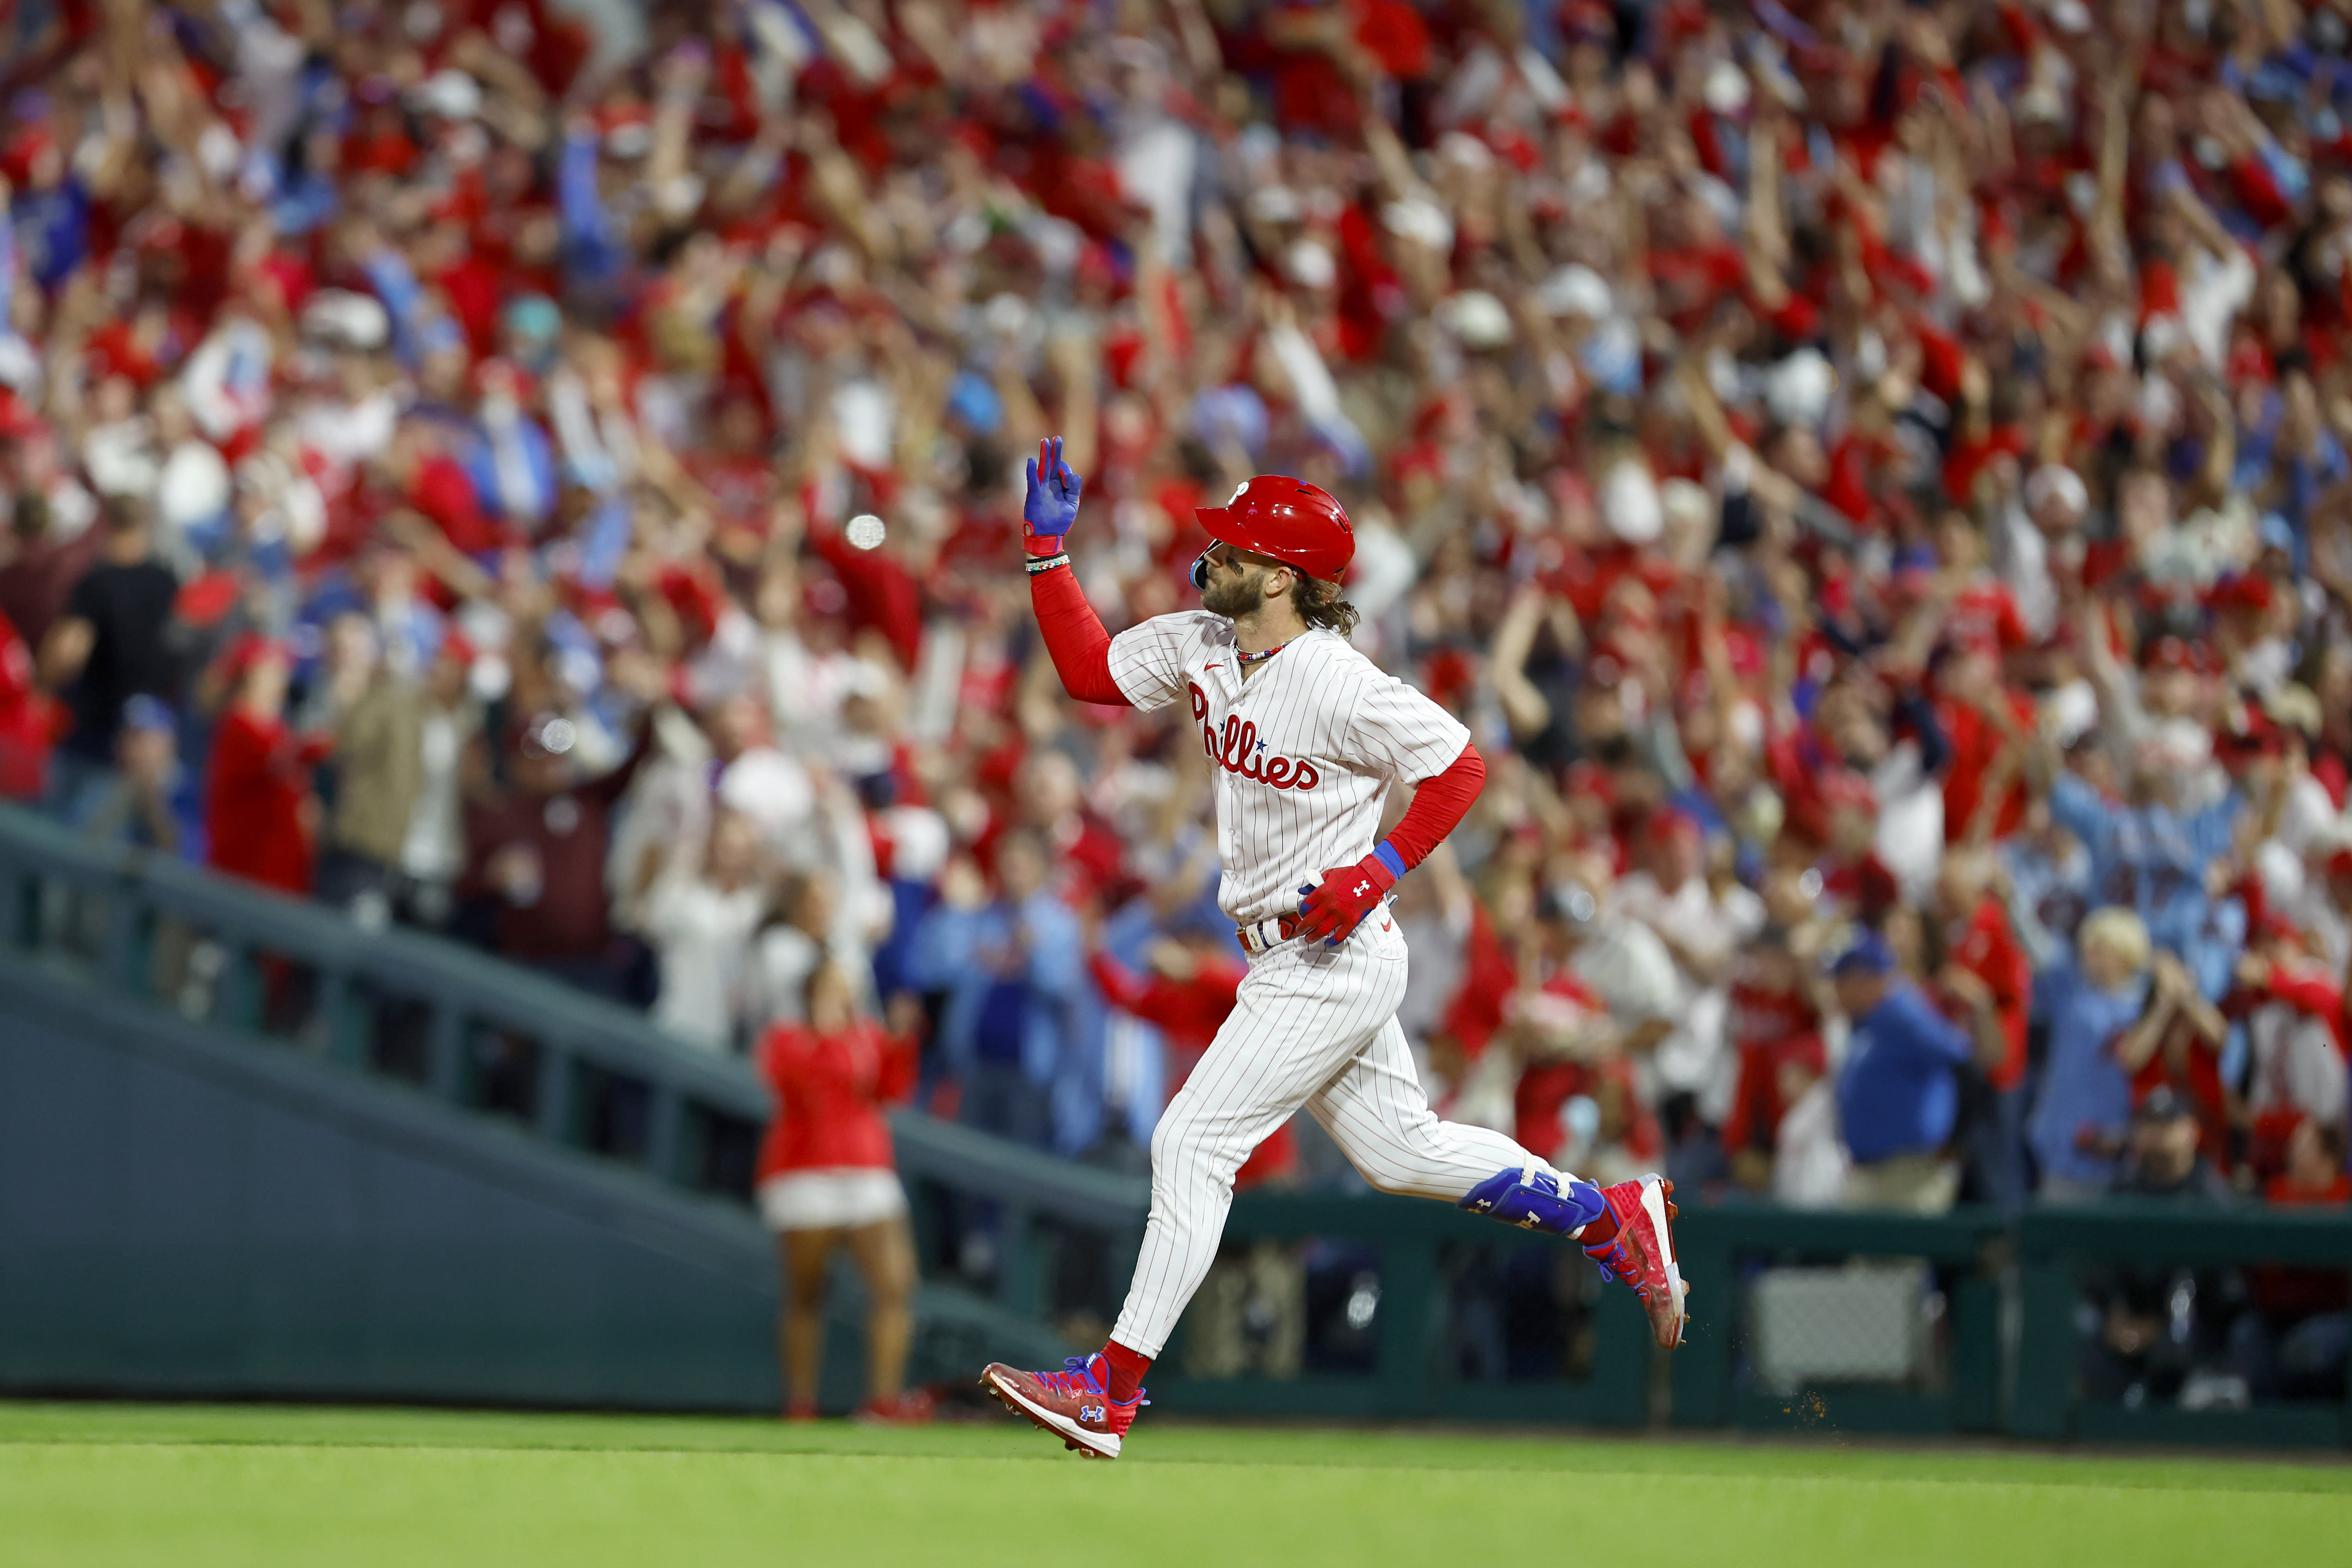 Phillies sweep Angels with late game dramatics from Harper and